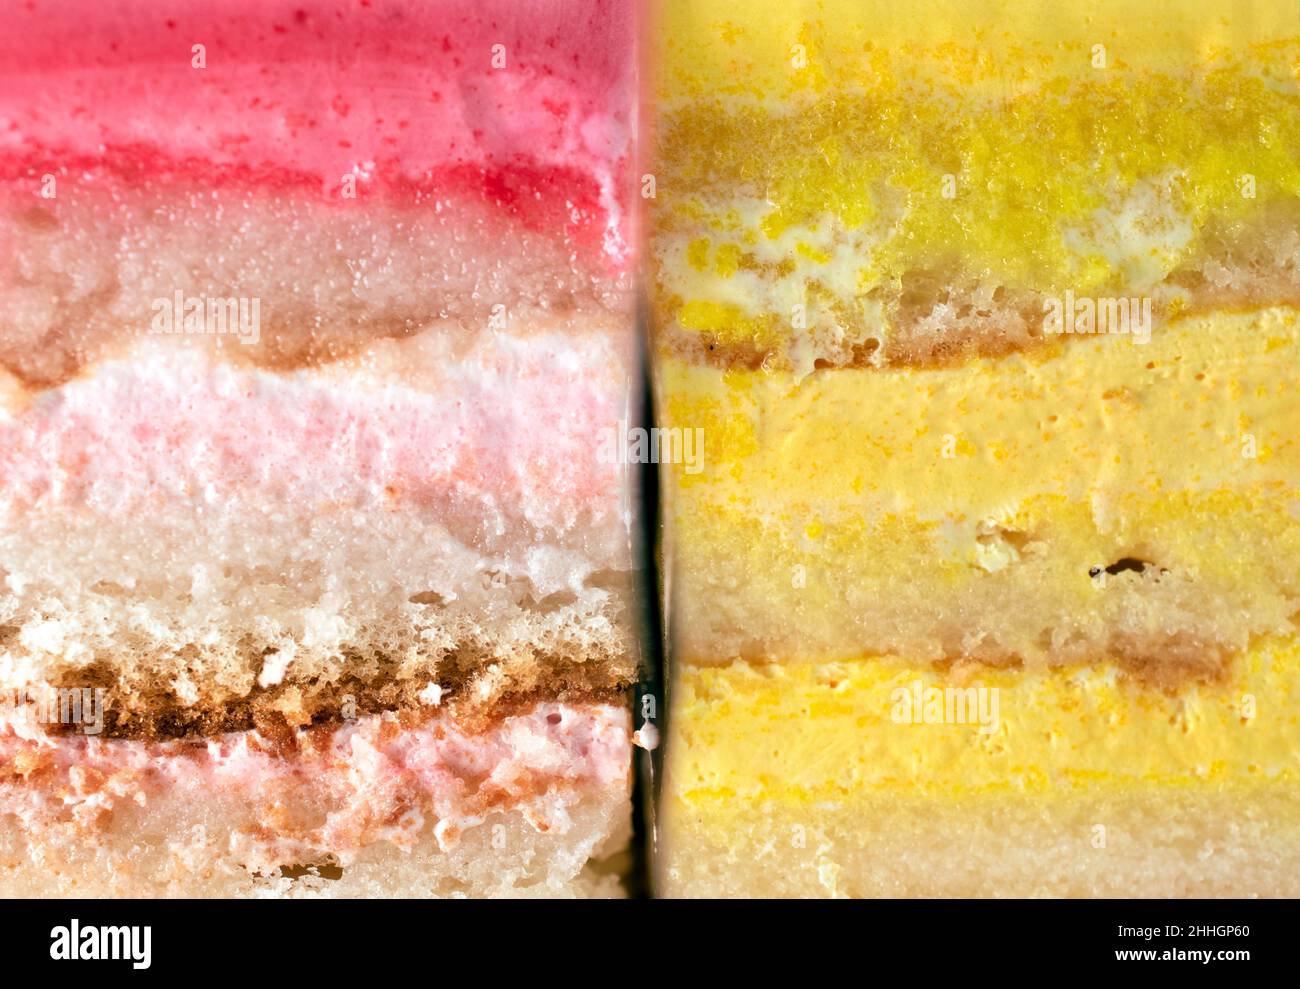 Selection of layered cream and sponge cakes of different colors Stock Photo